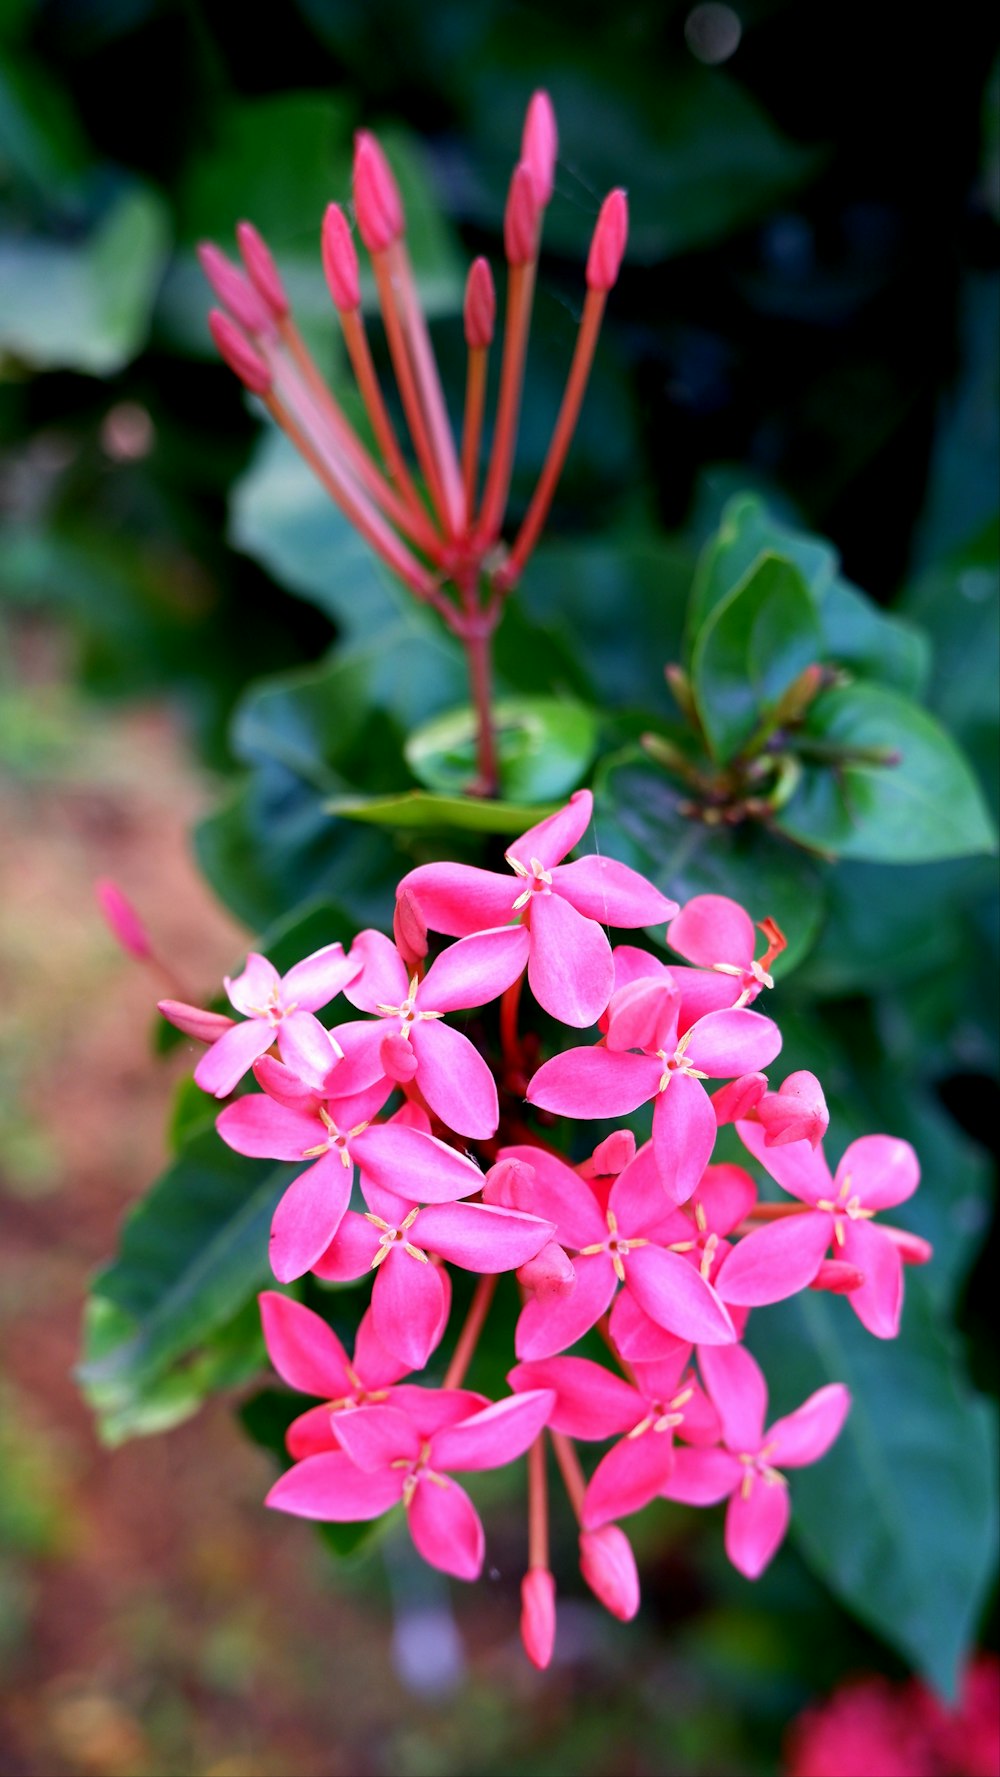 a close up of a pink flower with green leaves